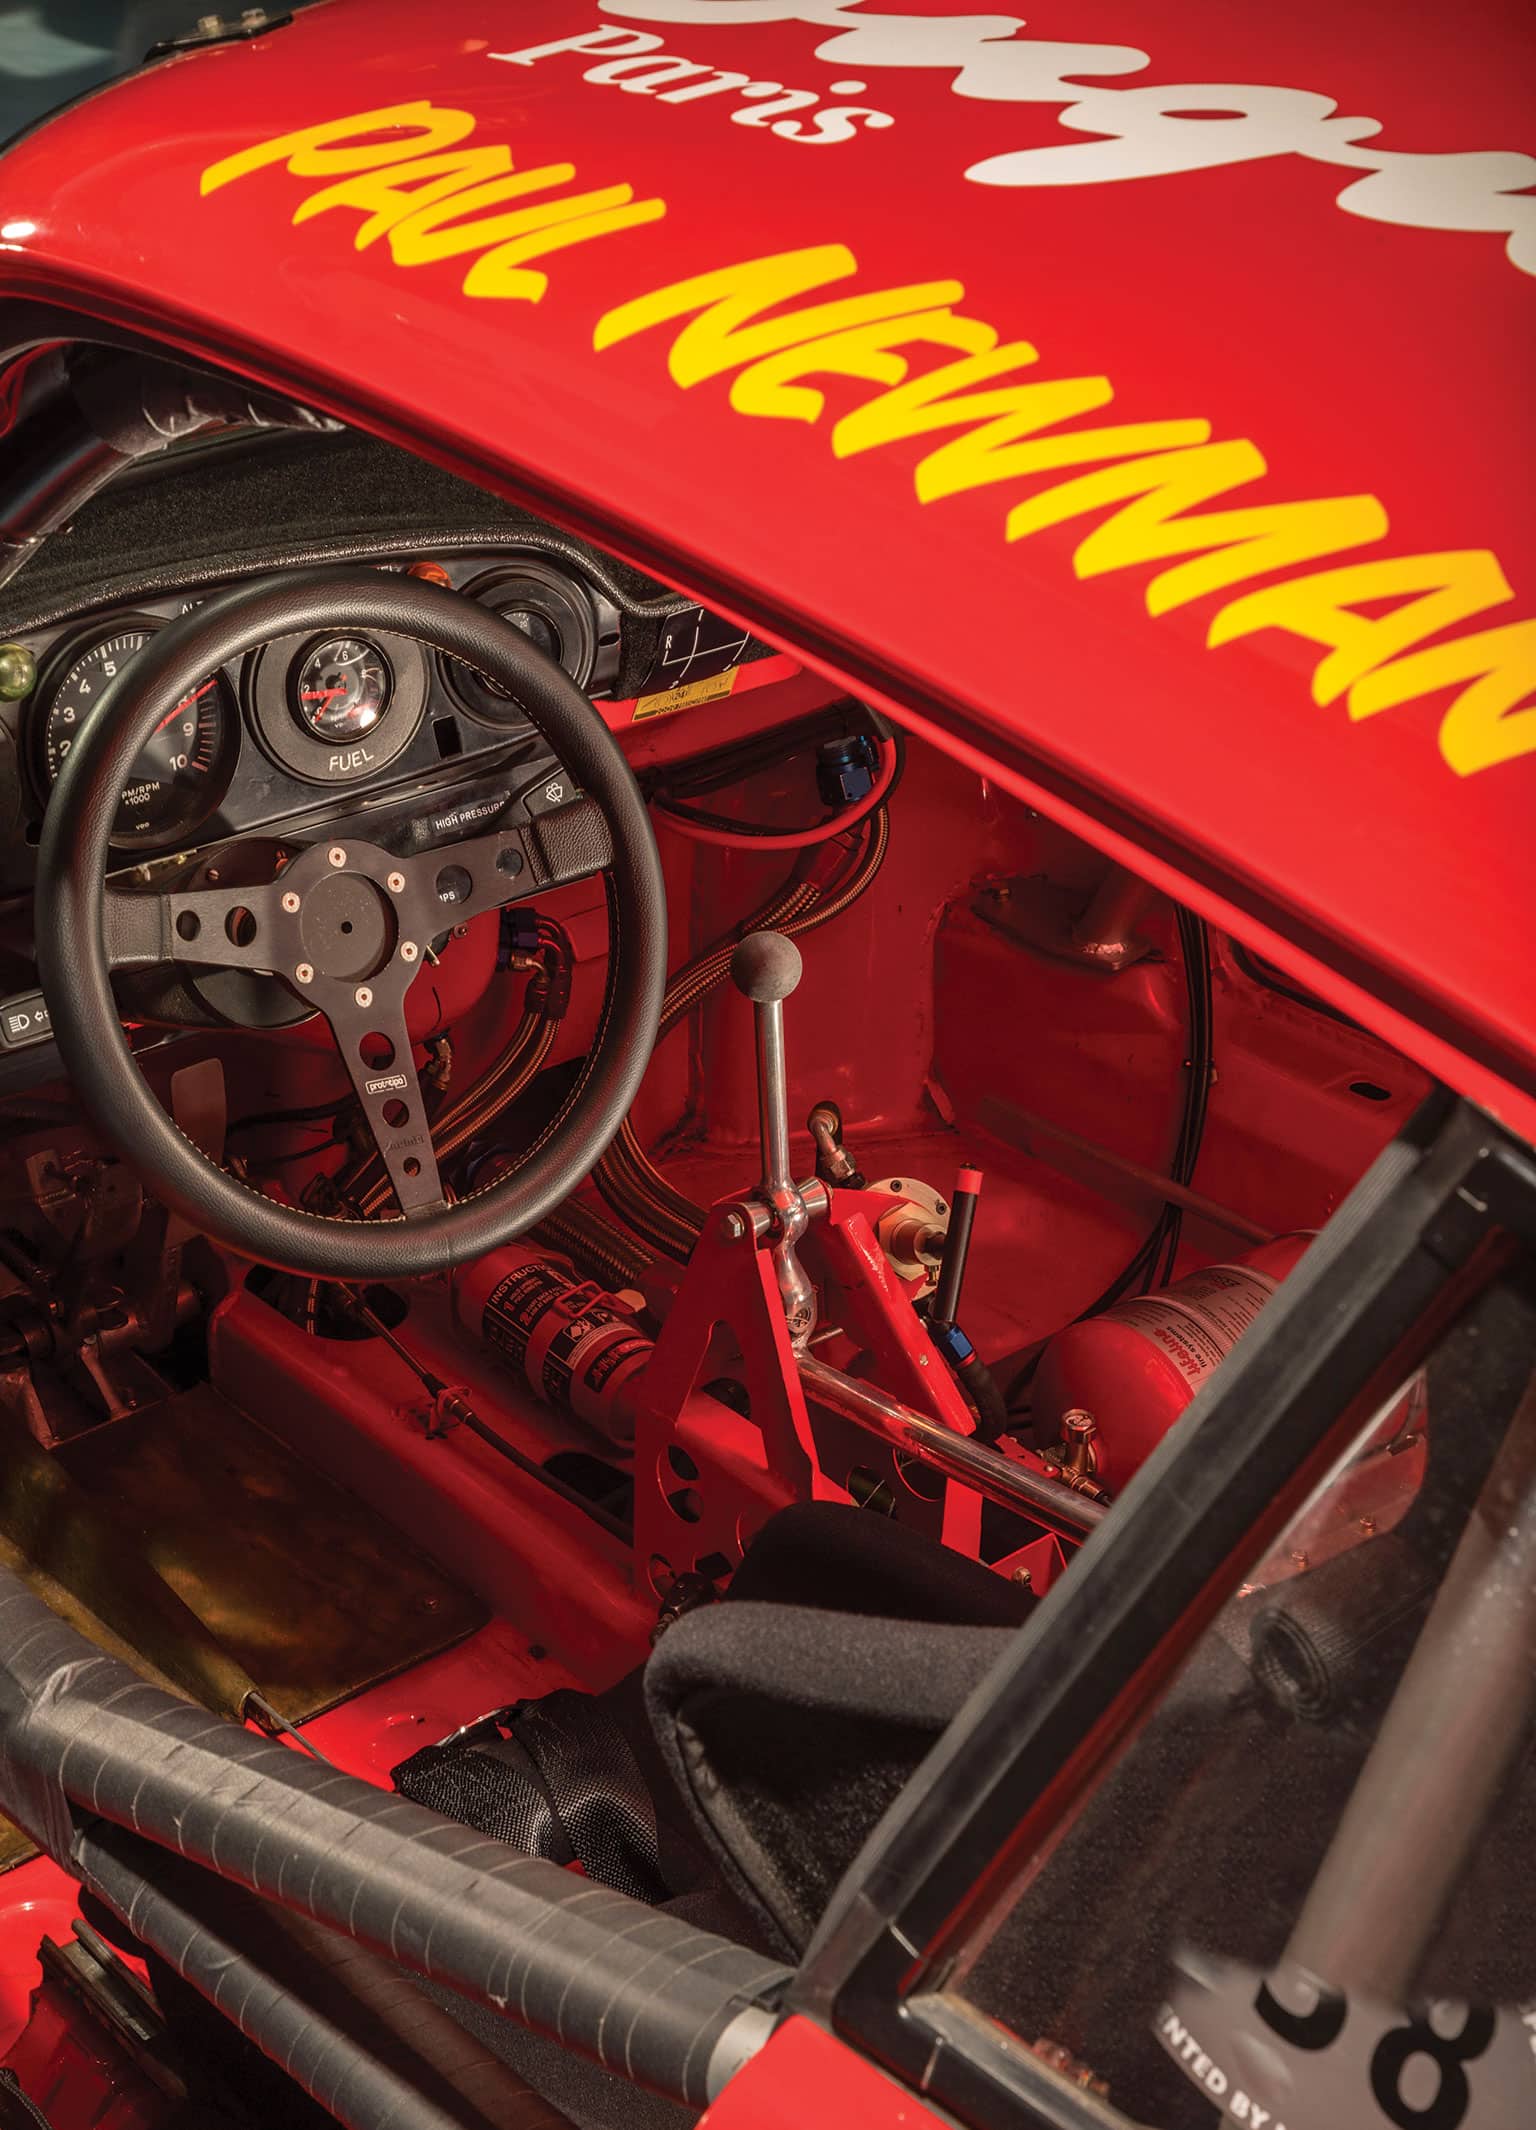 Newman's seat in the 935